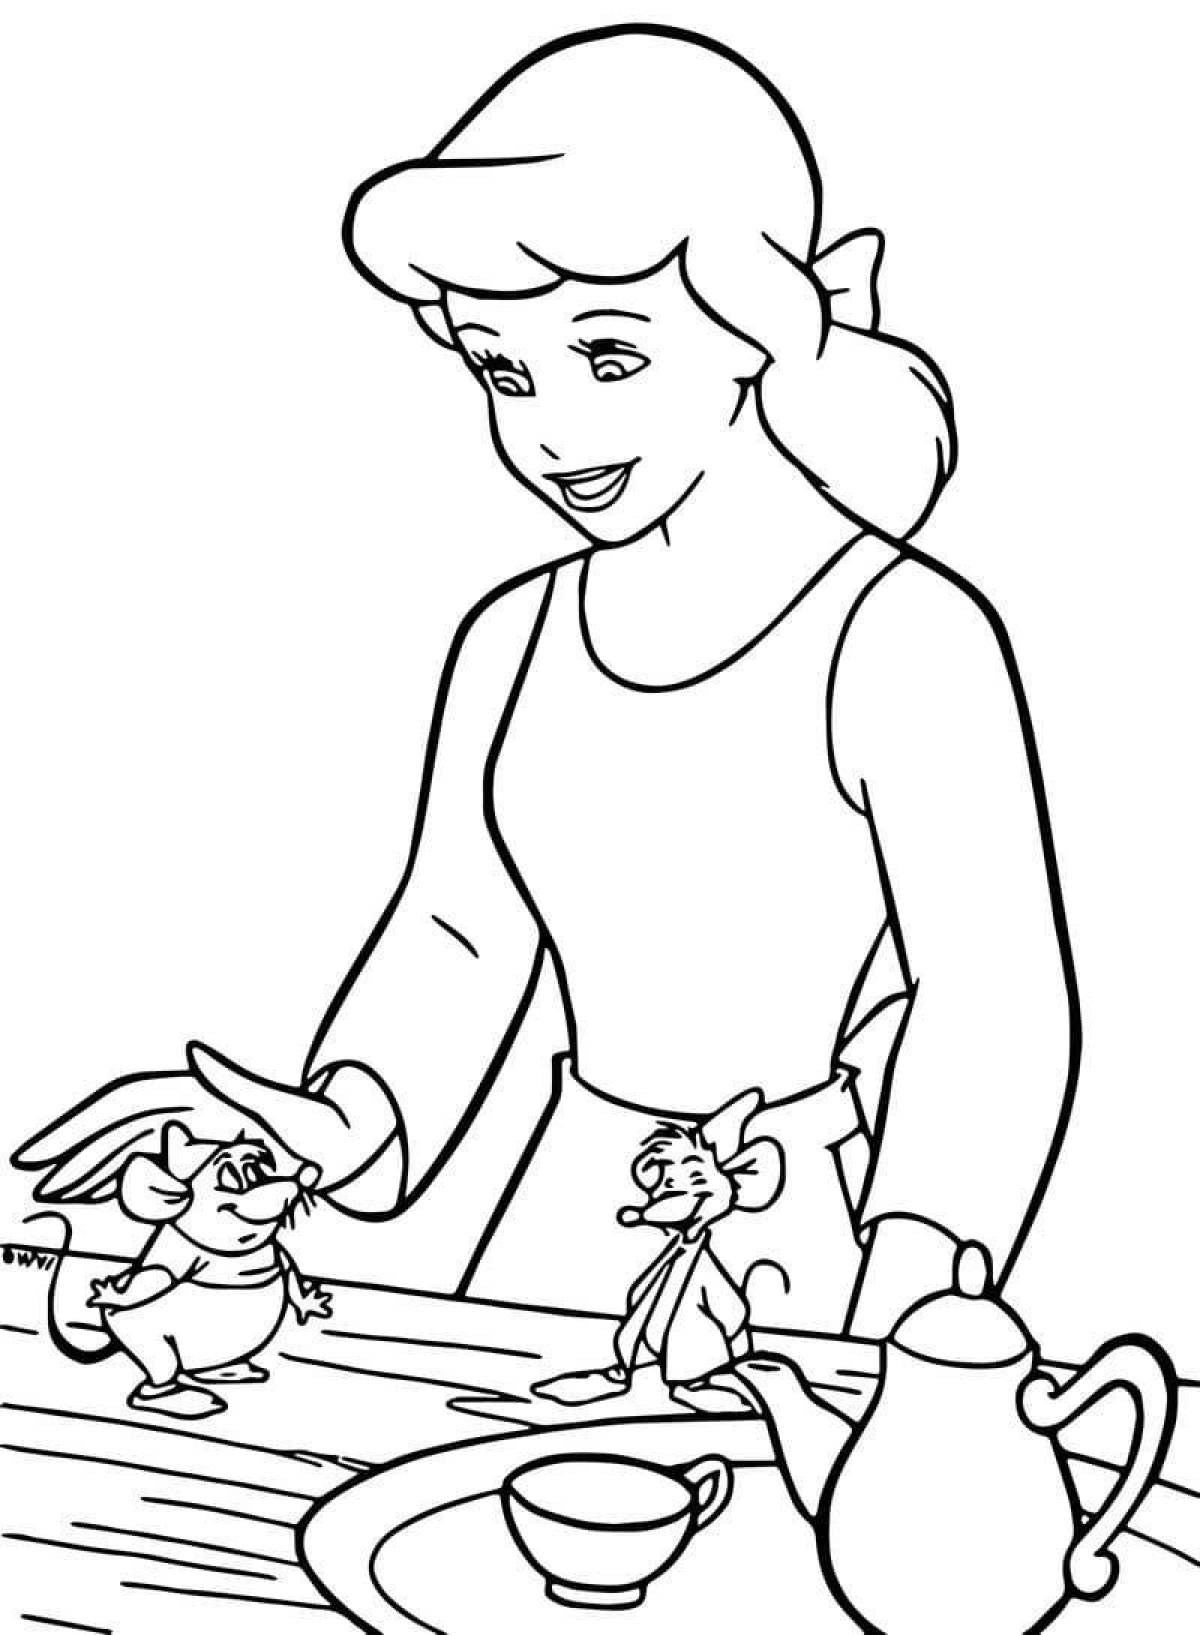 Whimsical Cinderella coloring book for kids